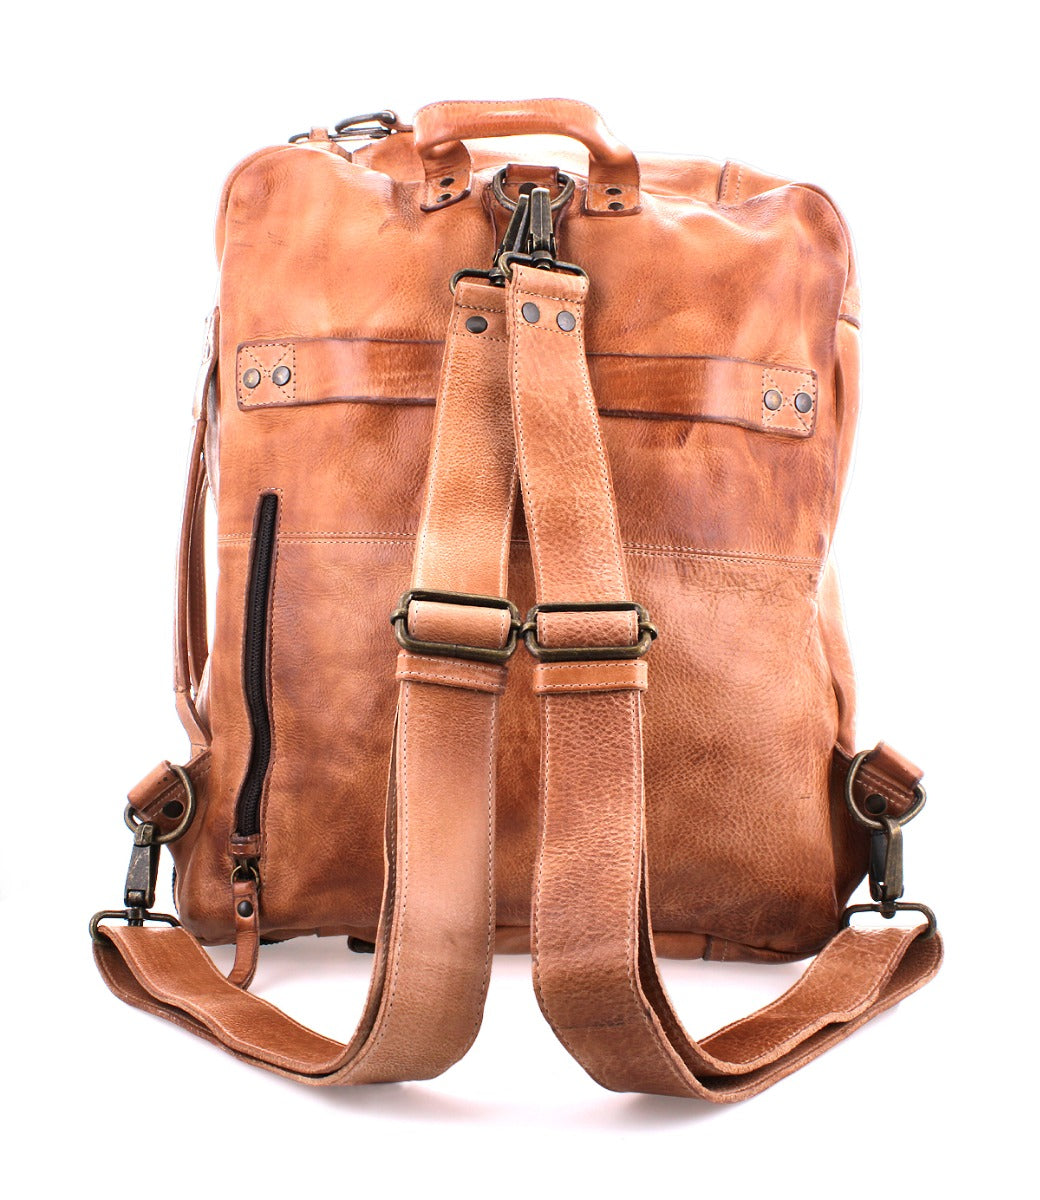 A brown leather Socrates backpack with straps and buckles by Bed Stu.